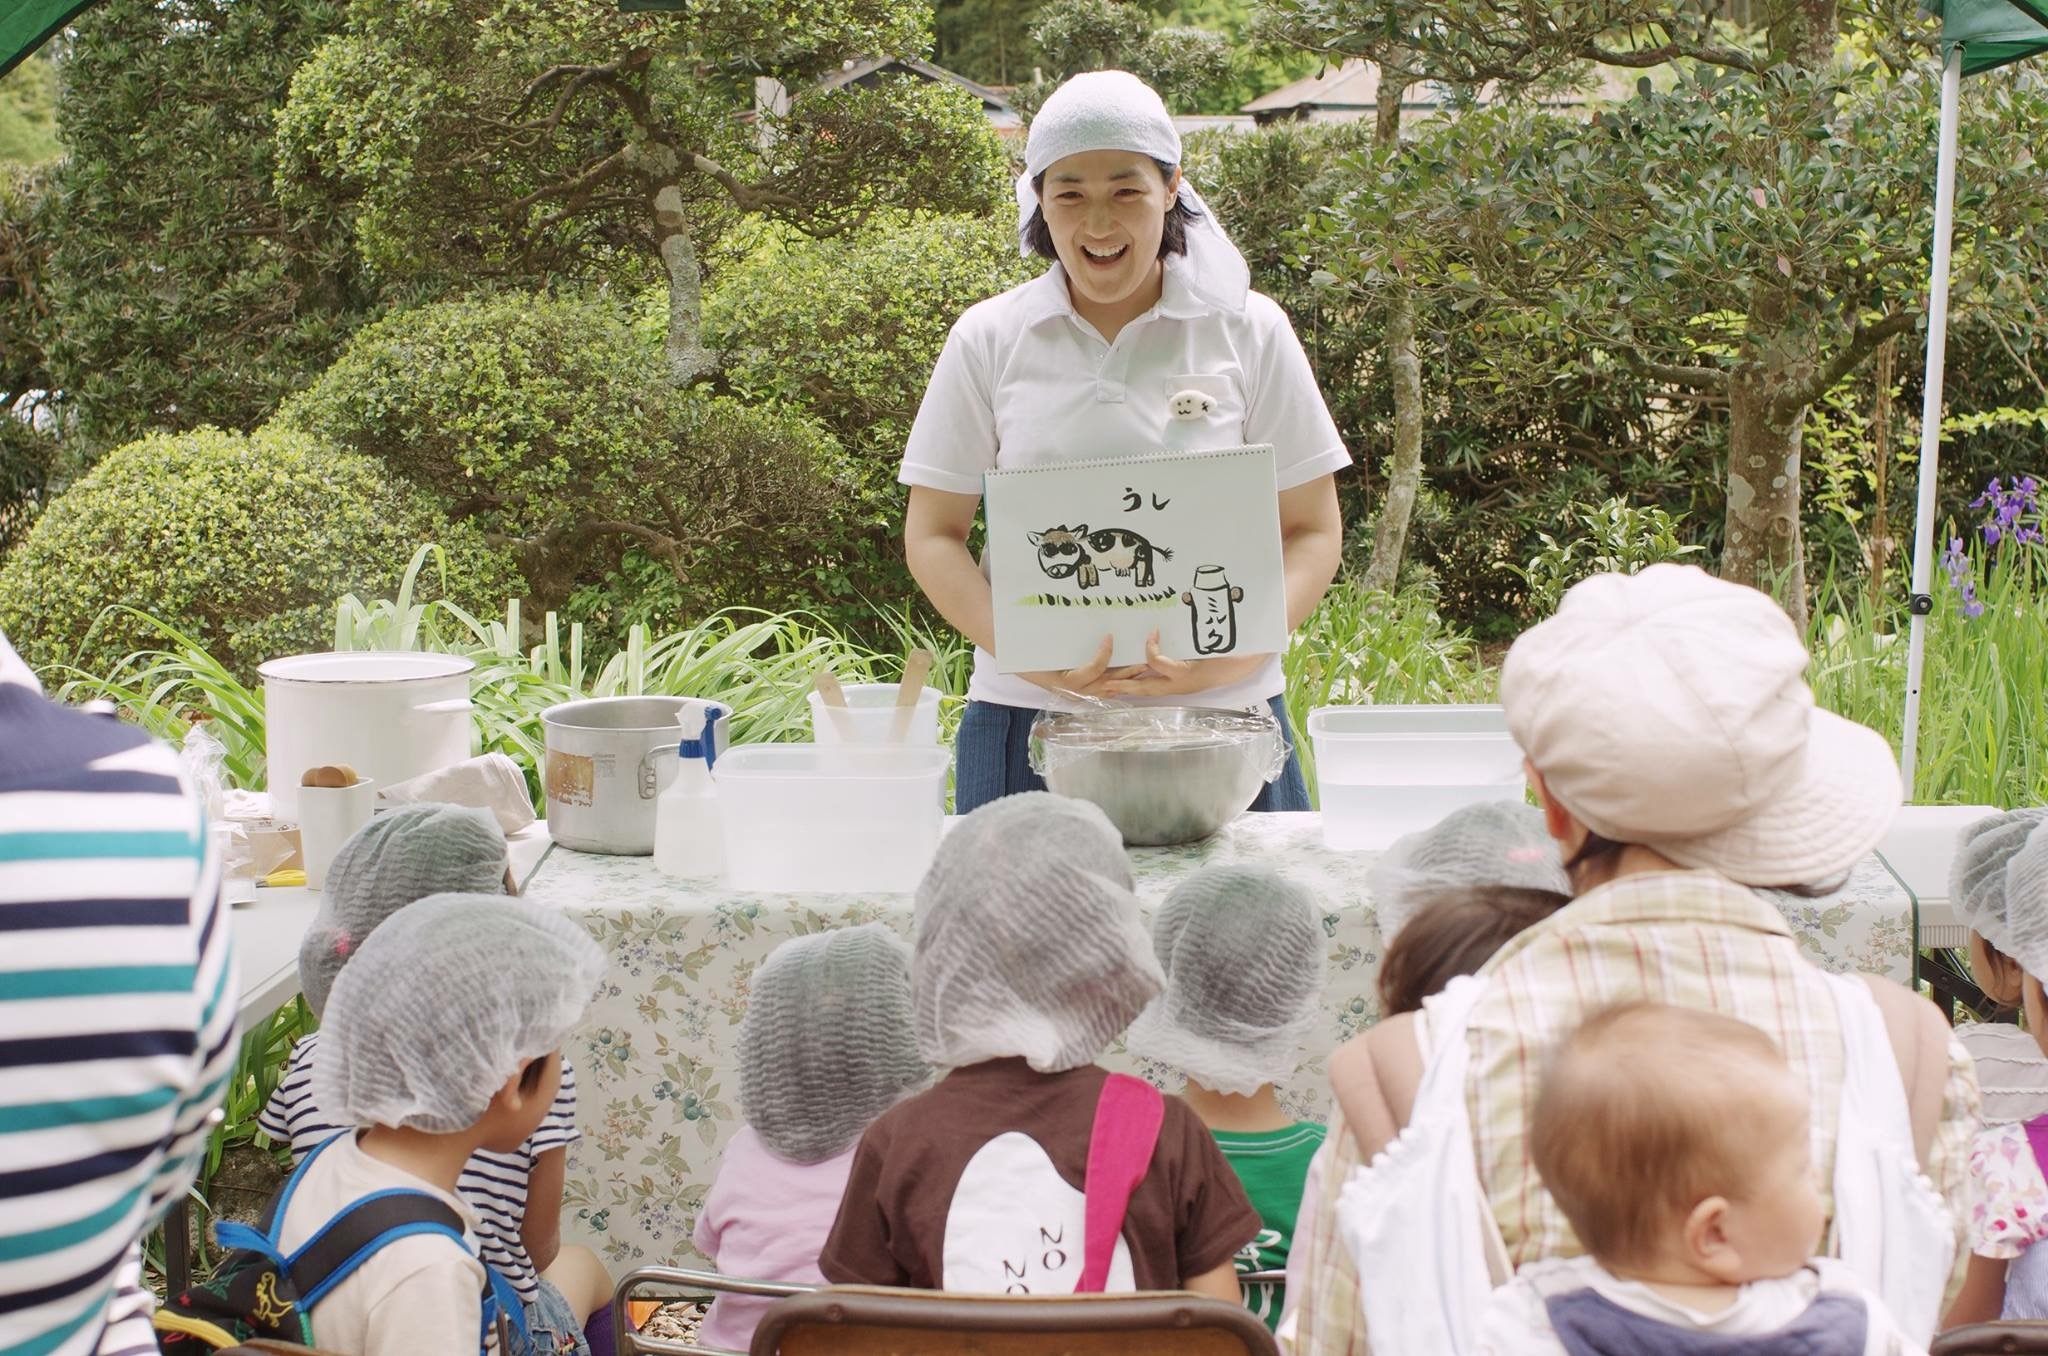 Shibata teaches a group of children and their caretakers about cheese.